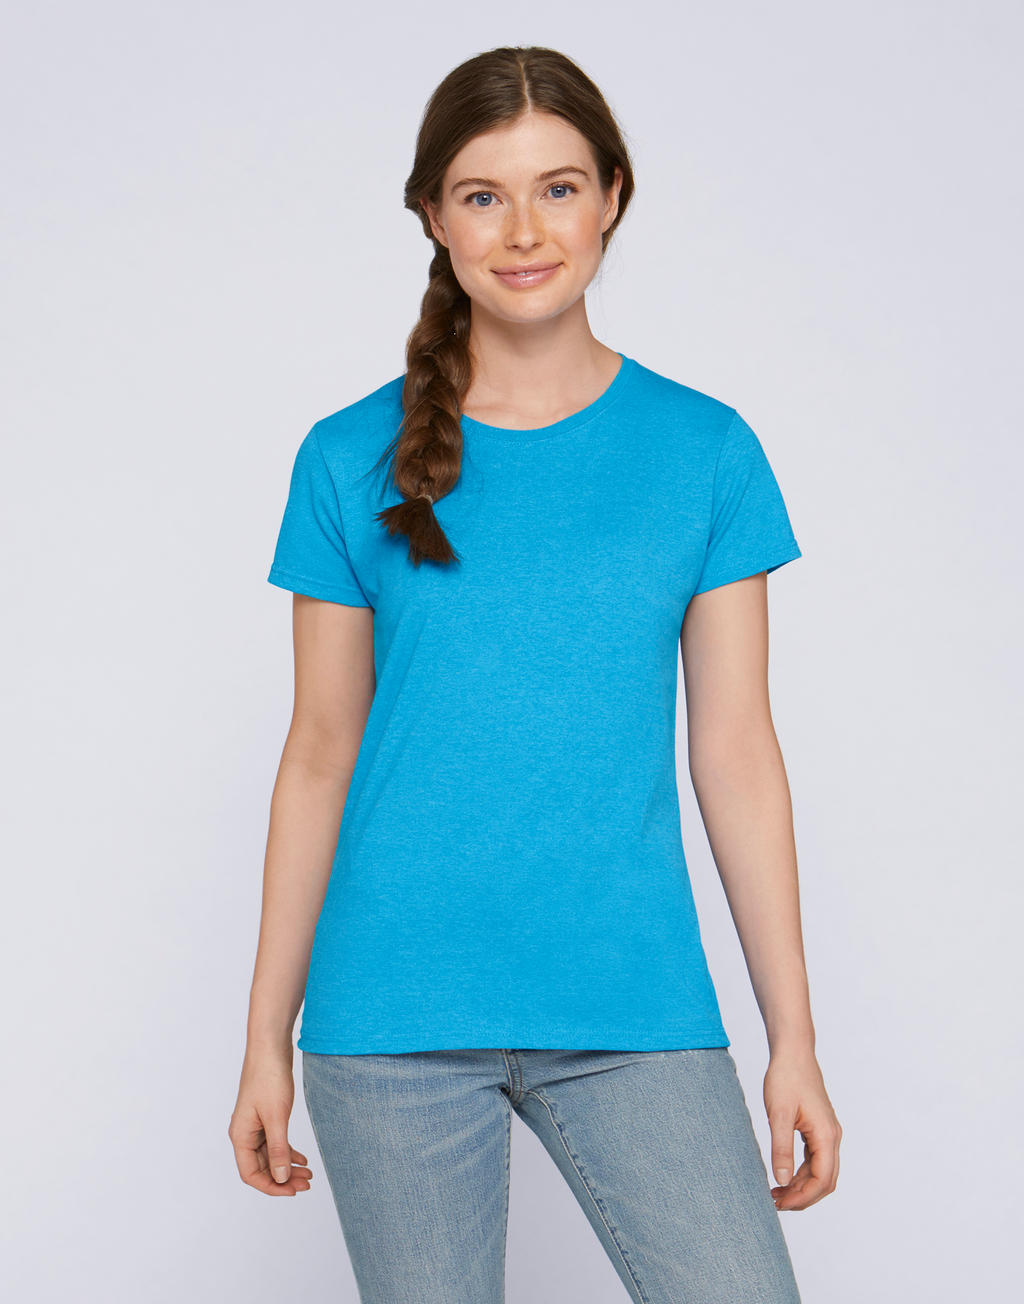  Ladies Heavy Cotton T-Shirt in Farbe White